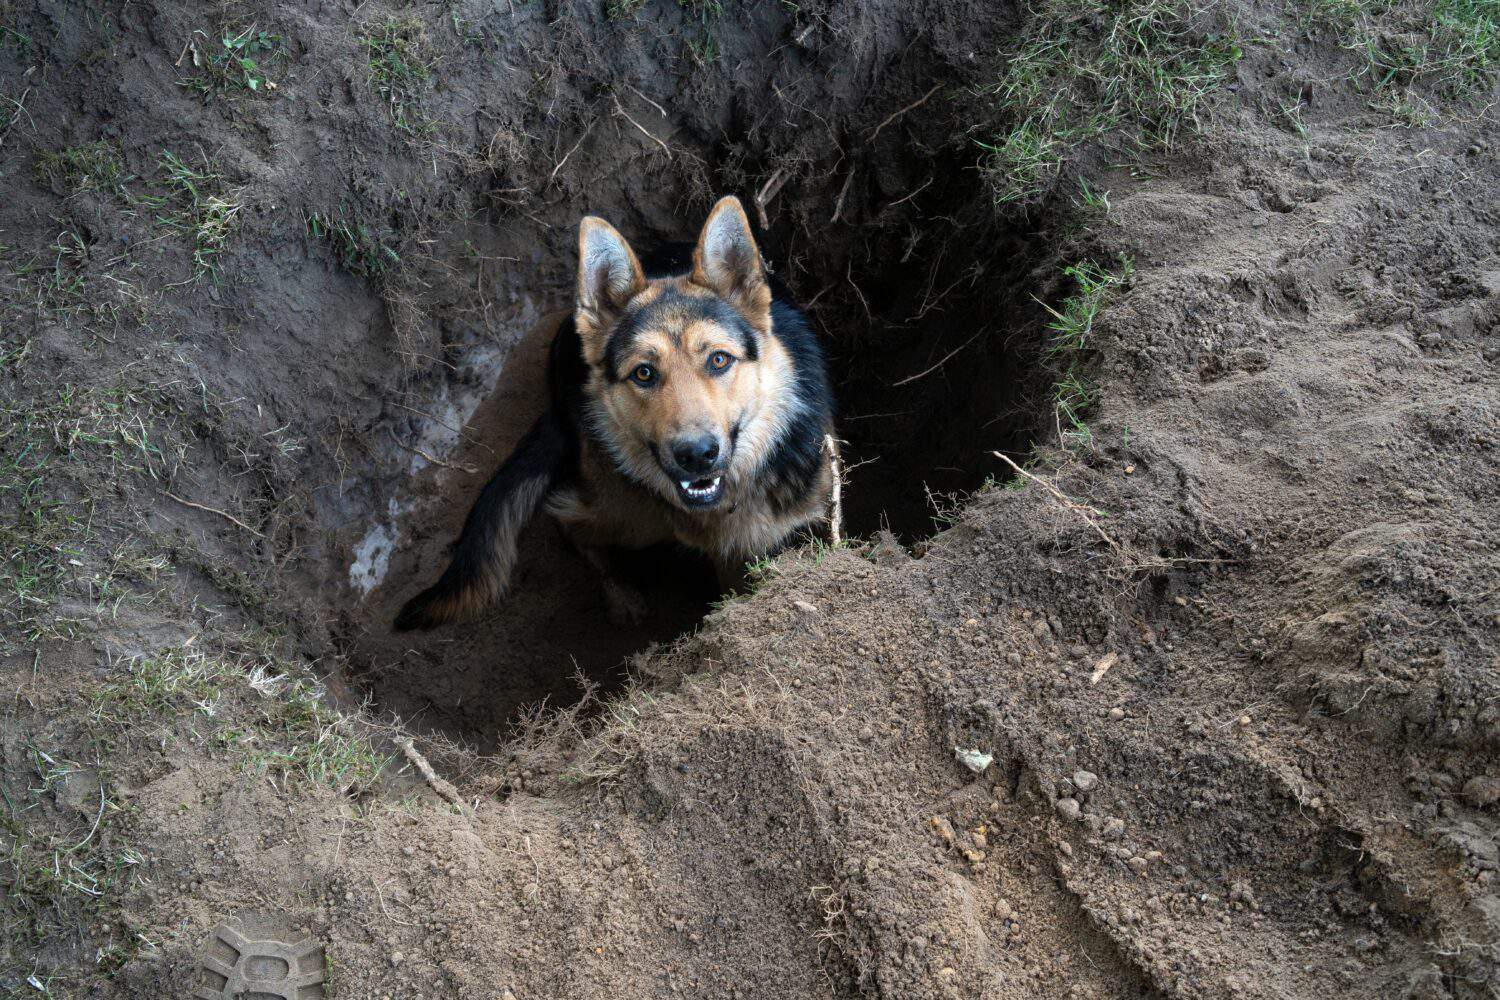 A playful German shepherd sitting in a digged hole in dirt. Shot in Estonia, Northern Europe.